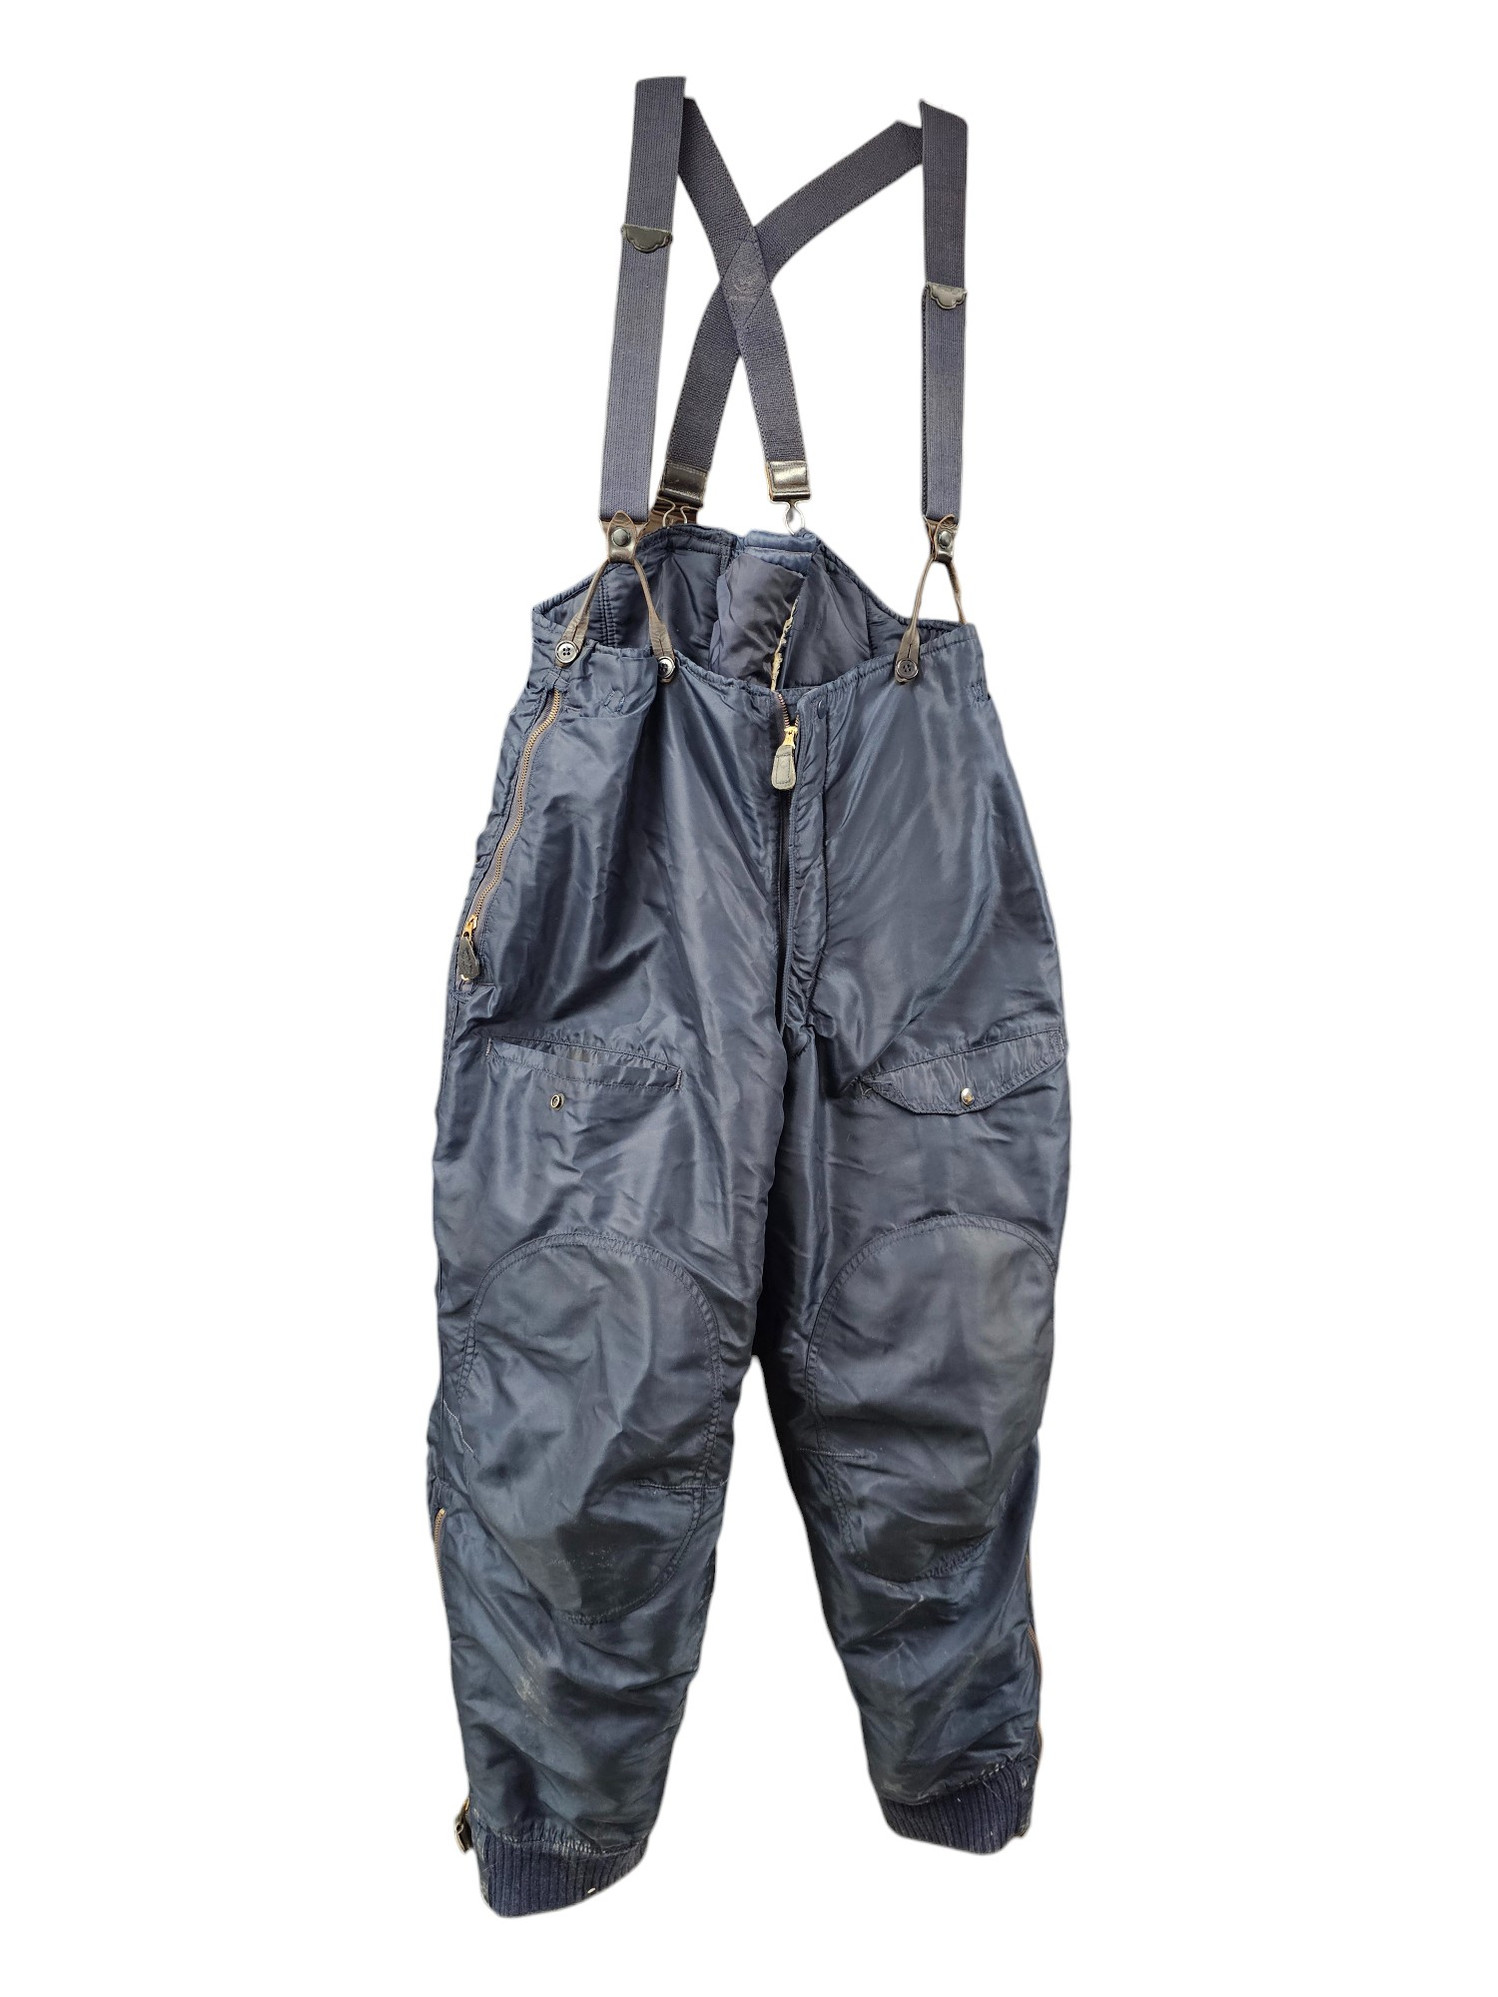 U.S. Armed Forces Air Crew F-1A Heavy Pants